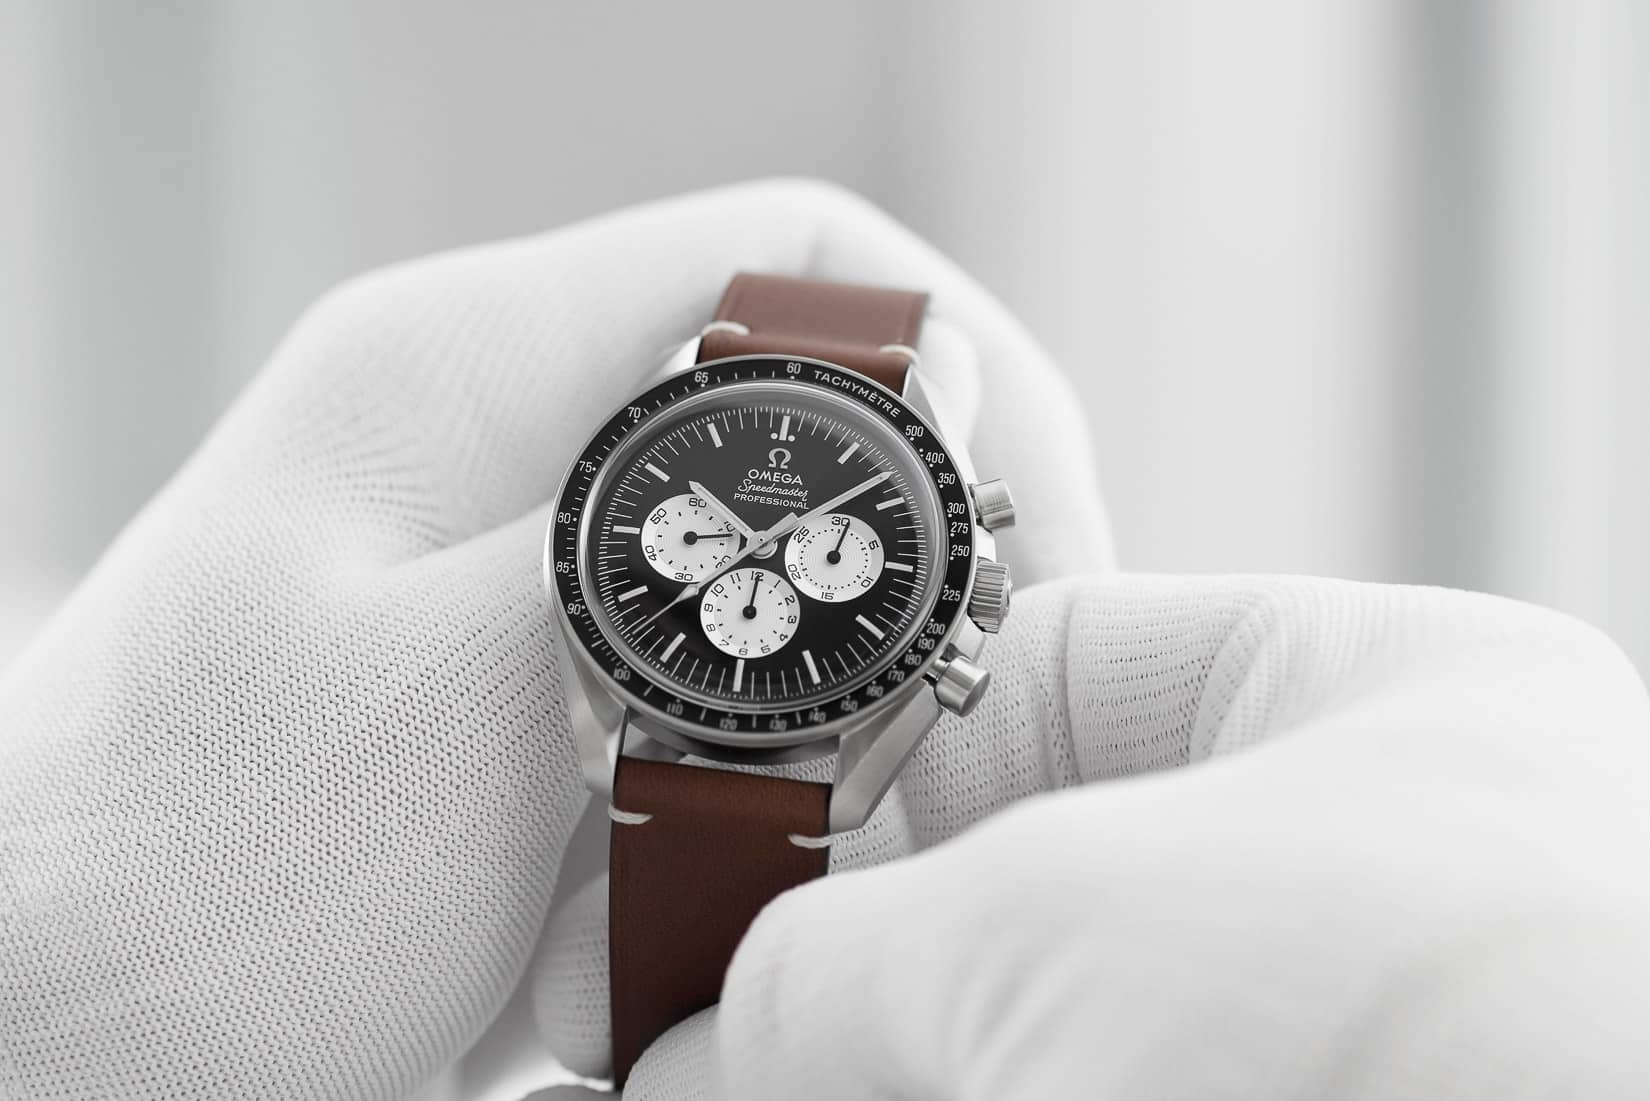 Speedy Tuesday – Omega Speedmaster Speedy Tuesday Limited Edition Left The Factory